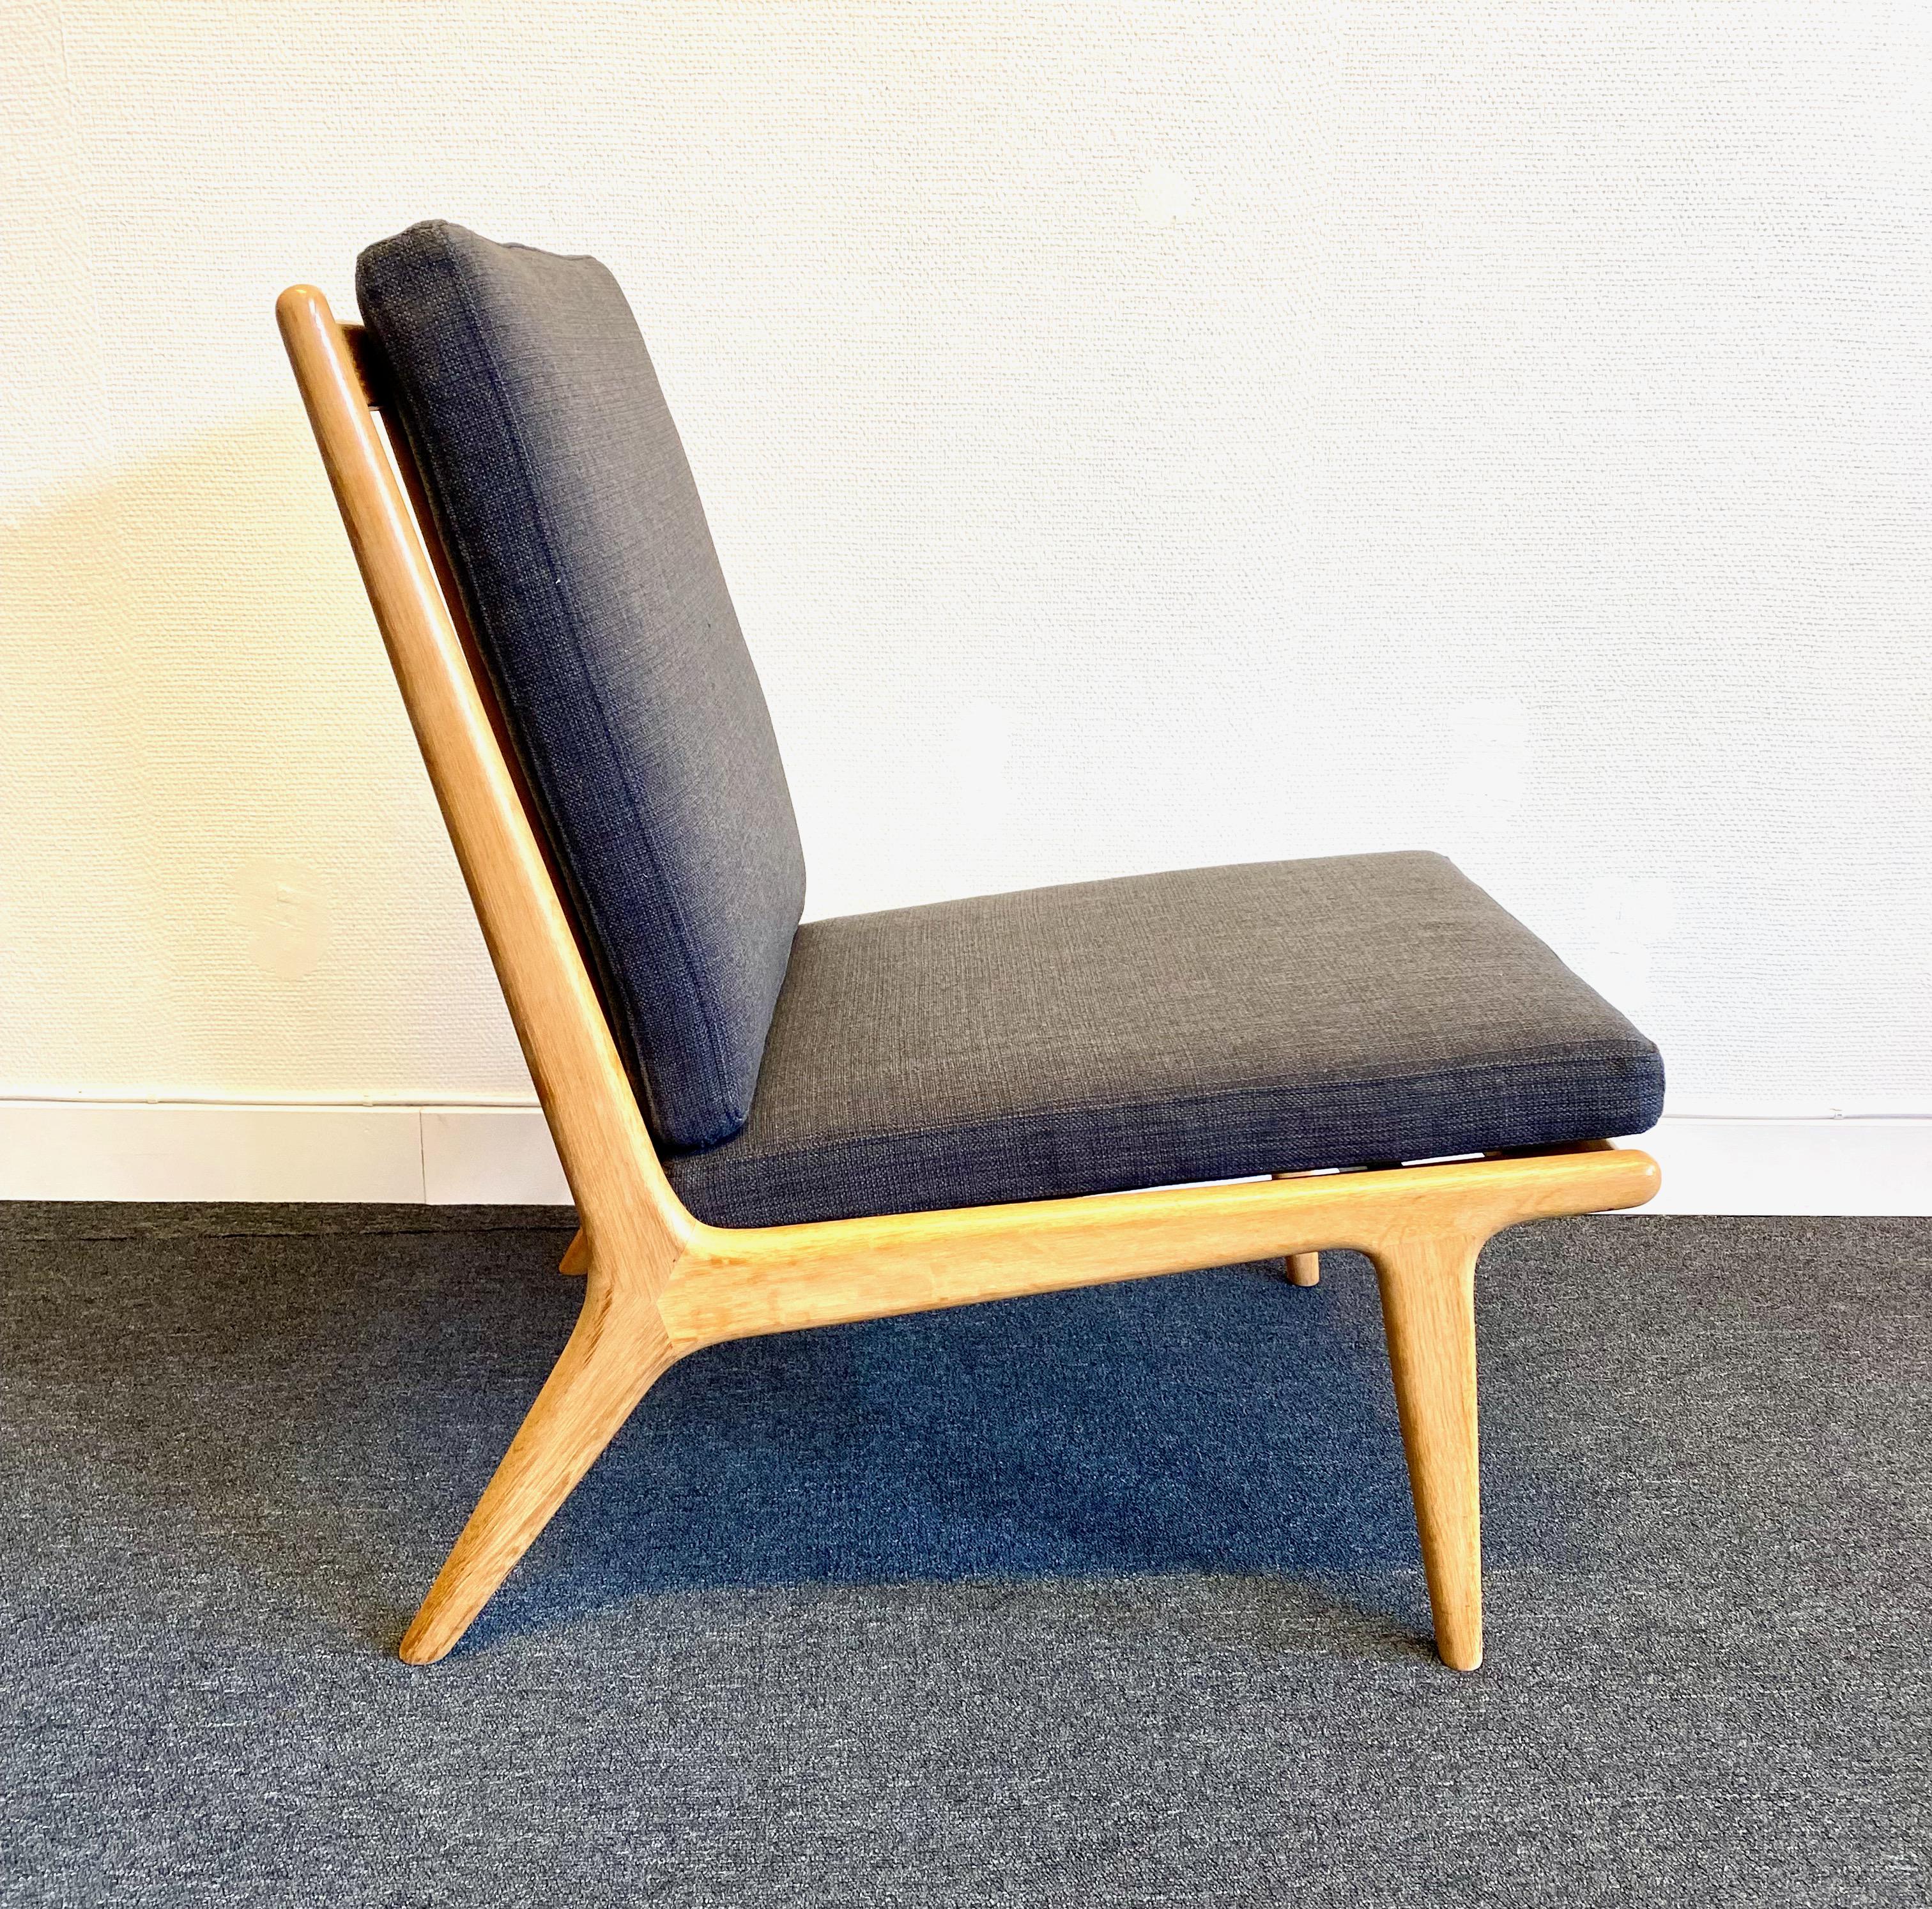 Oak lounge chair, and Ekselius´ version of the popular TV-chair from the 60´s. New cushions with a smooth brown quality upholstery. At the moment we have 3 identical chairs.

Karl Erik Ekselius was a Swedish furniture designer born in 1914 in